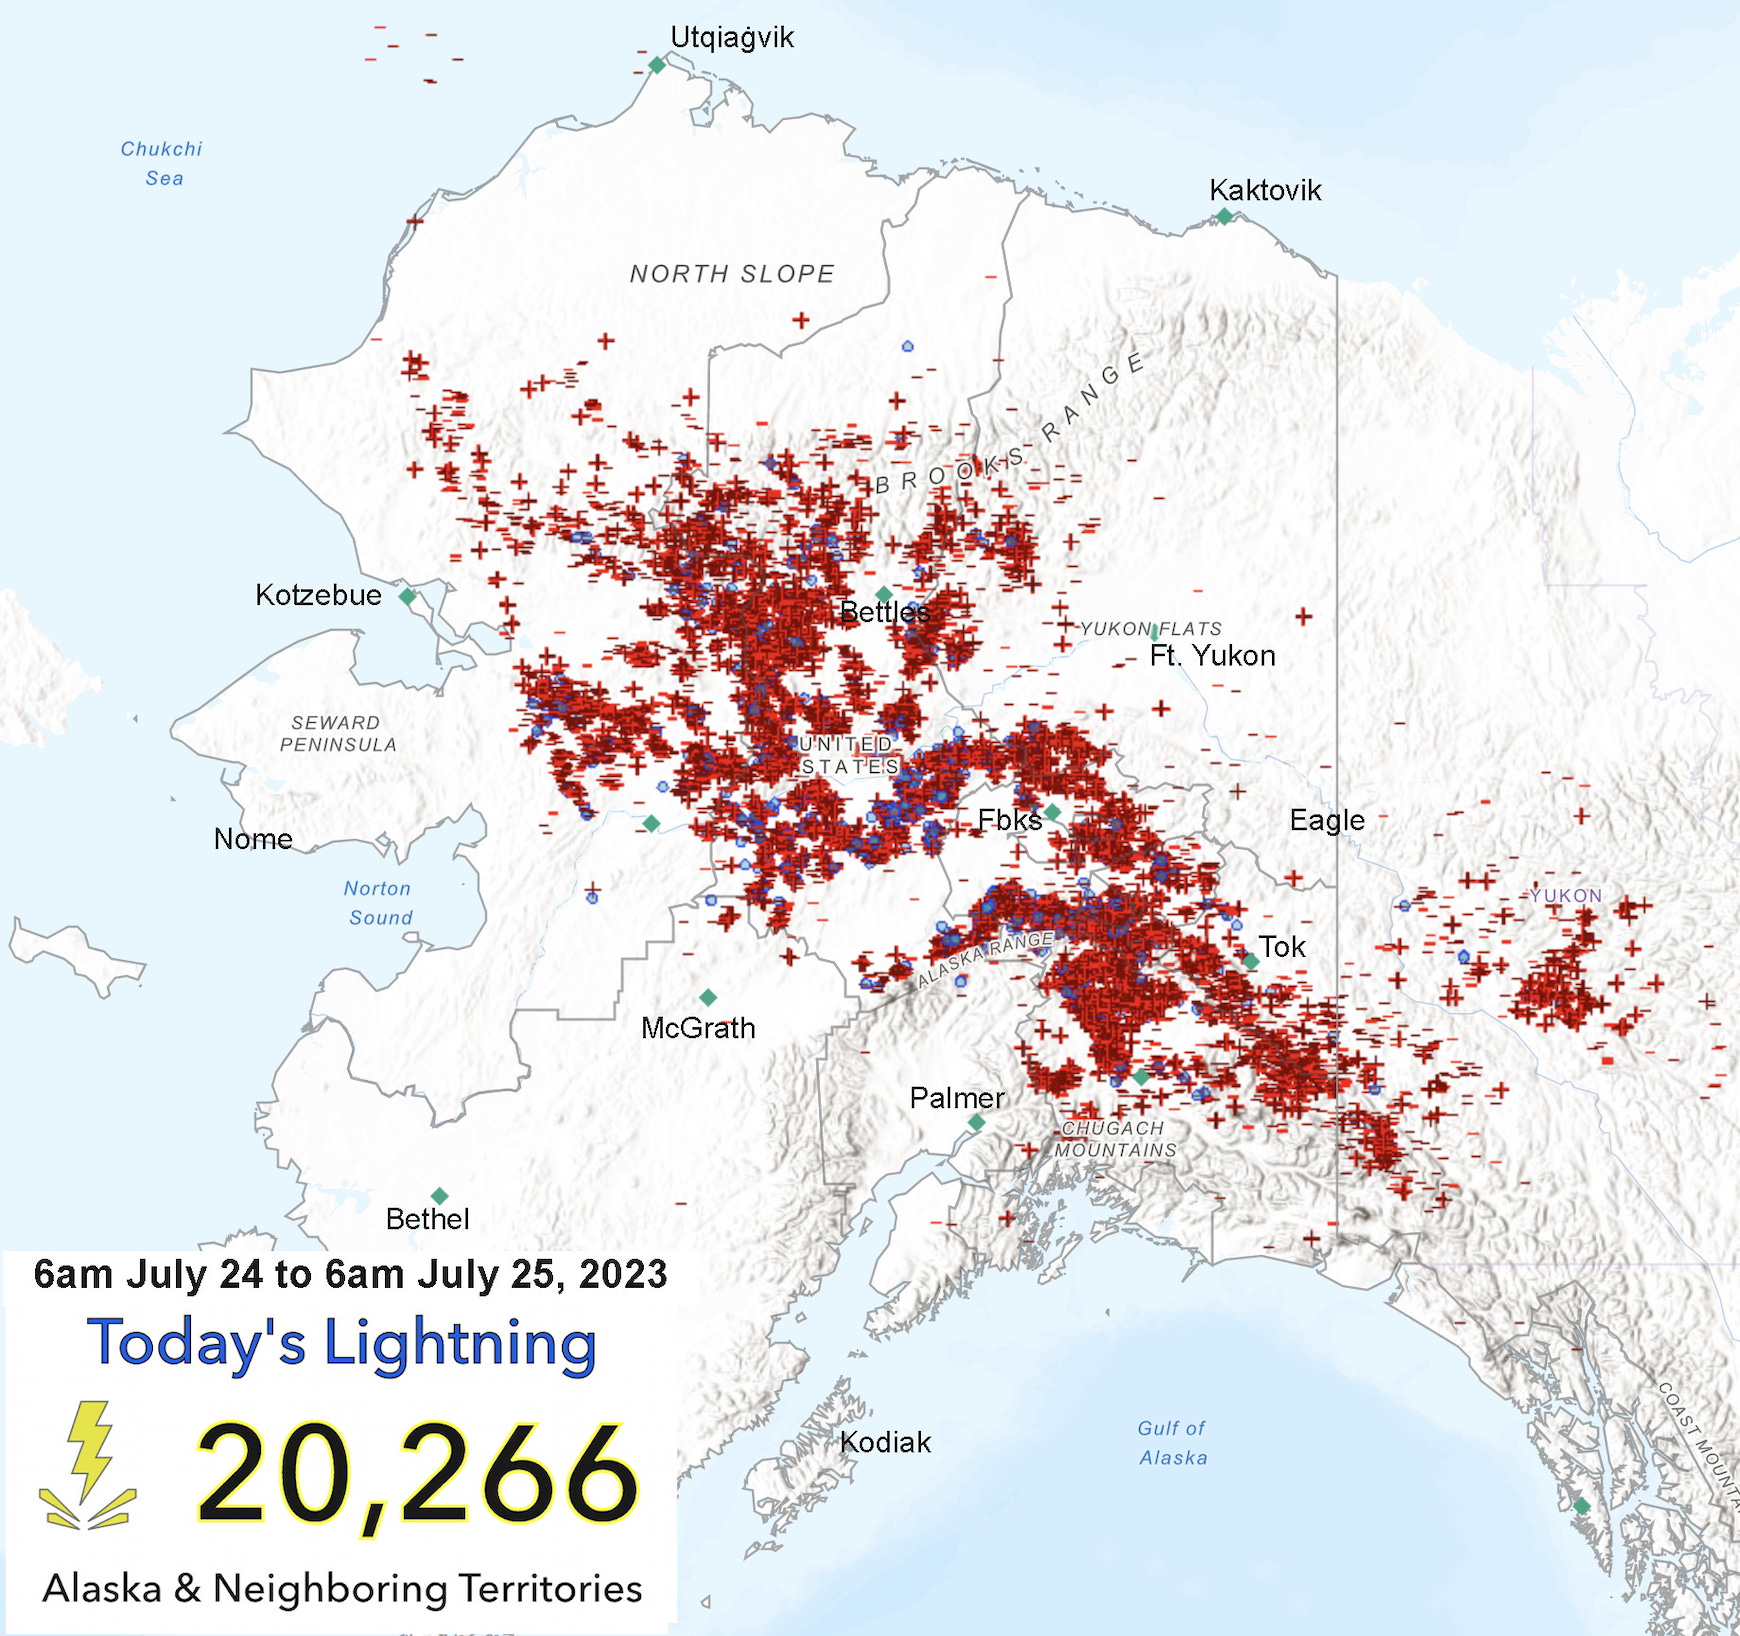 A map of Alaska features red cross marks to show lightning strike locations on July 24-25, 2023.